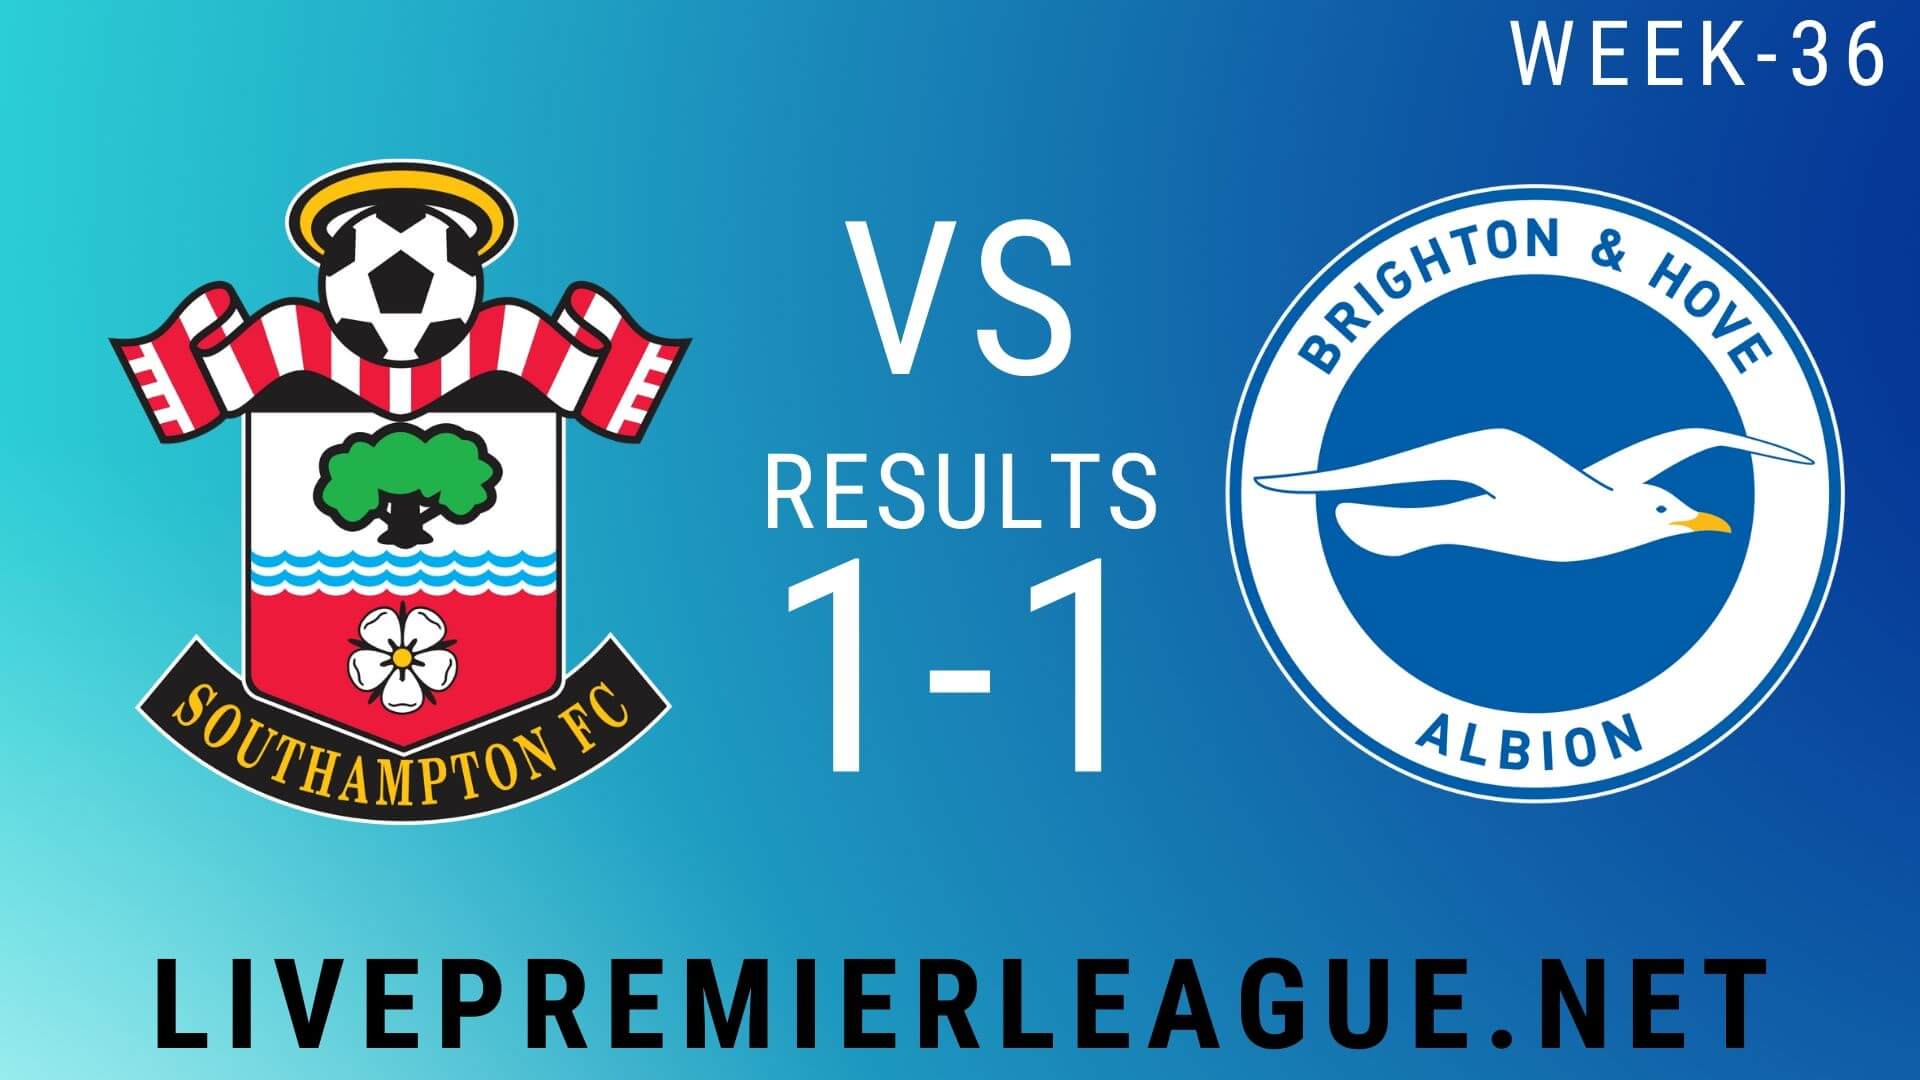 Southampton Vs Brighton and Hove Albion | Week 36 Result 2020